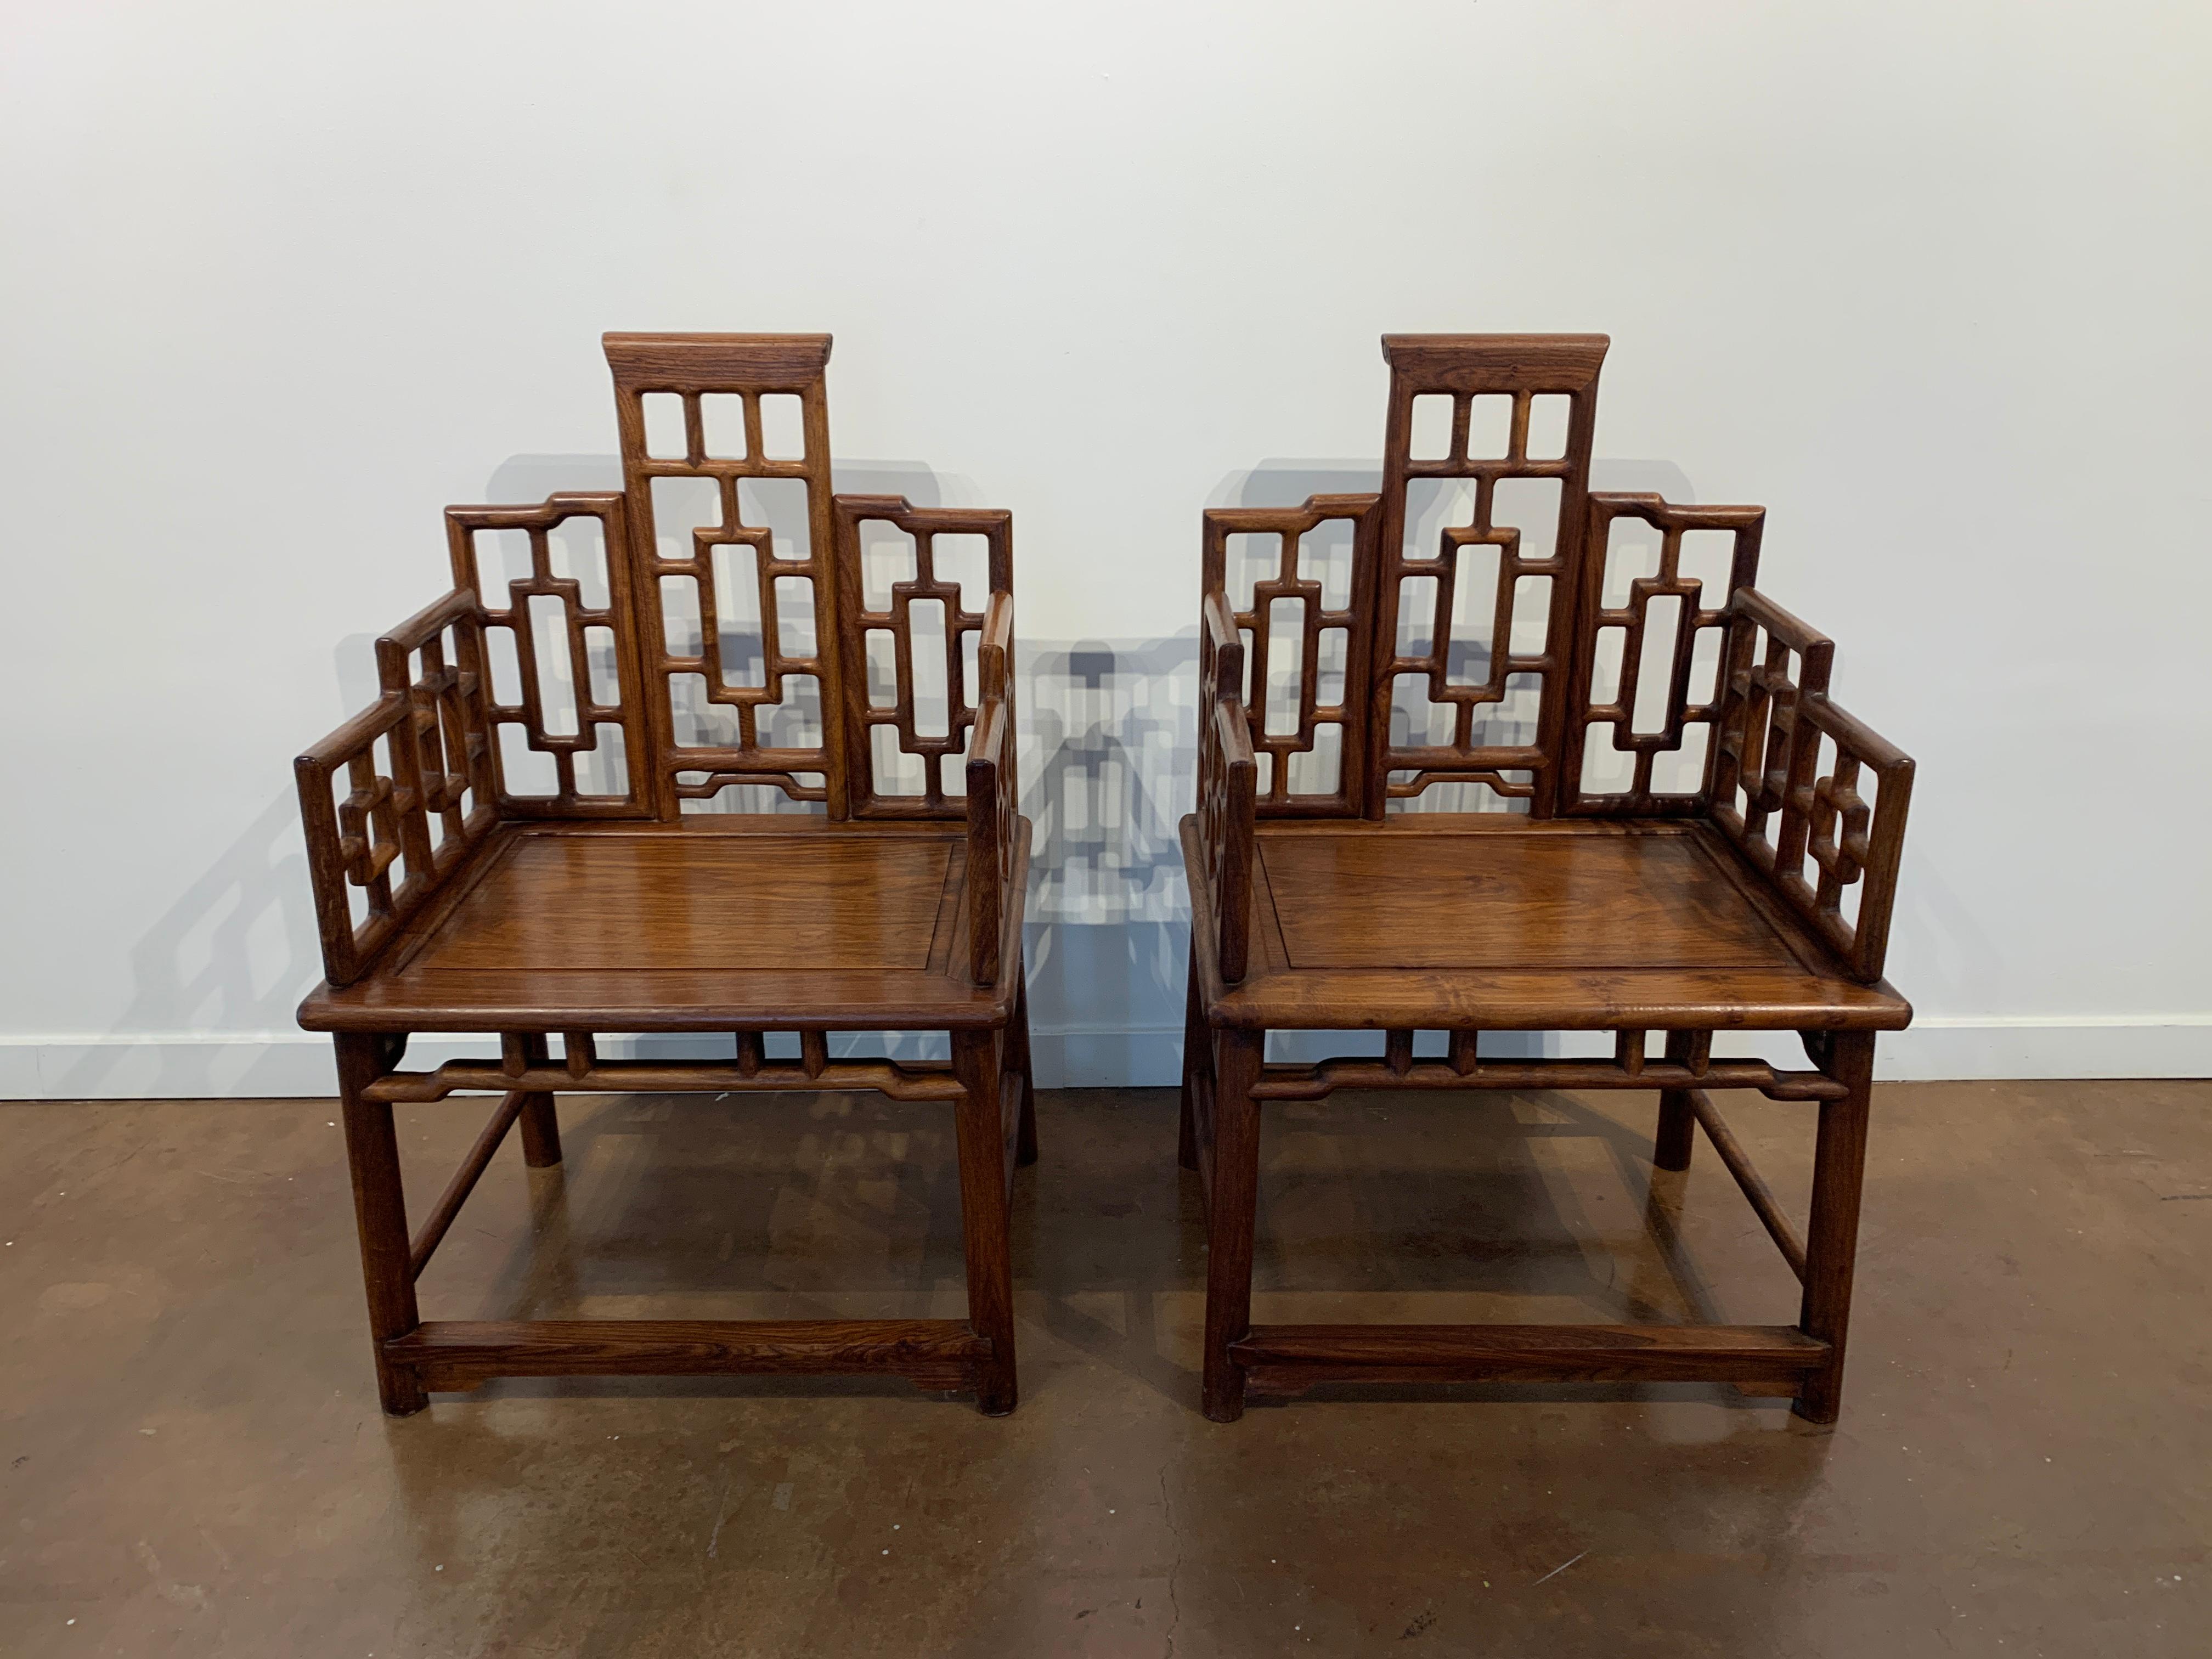 A striking pair of Chinese geometric panel hardwood armchairs, fushouyi, mid-20th century, China. 

The somewhat oversized armchairs are made from a dense and beautifully figured hardwood or reddish brown tone that displays enchanting honey